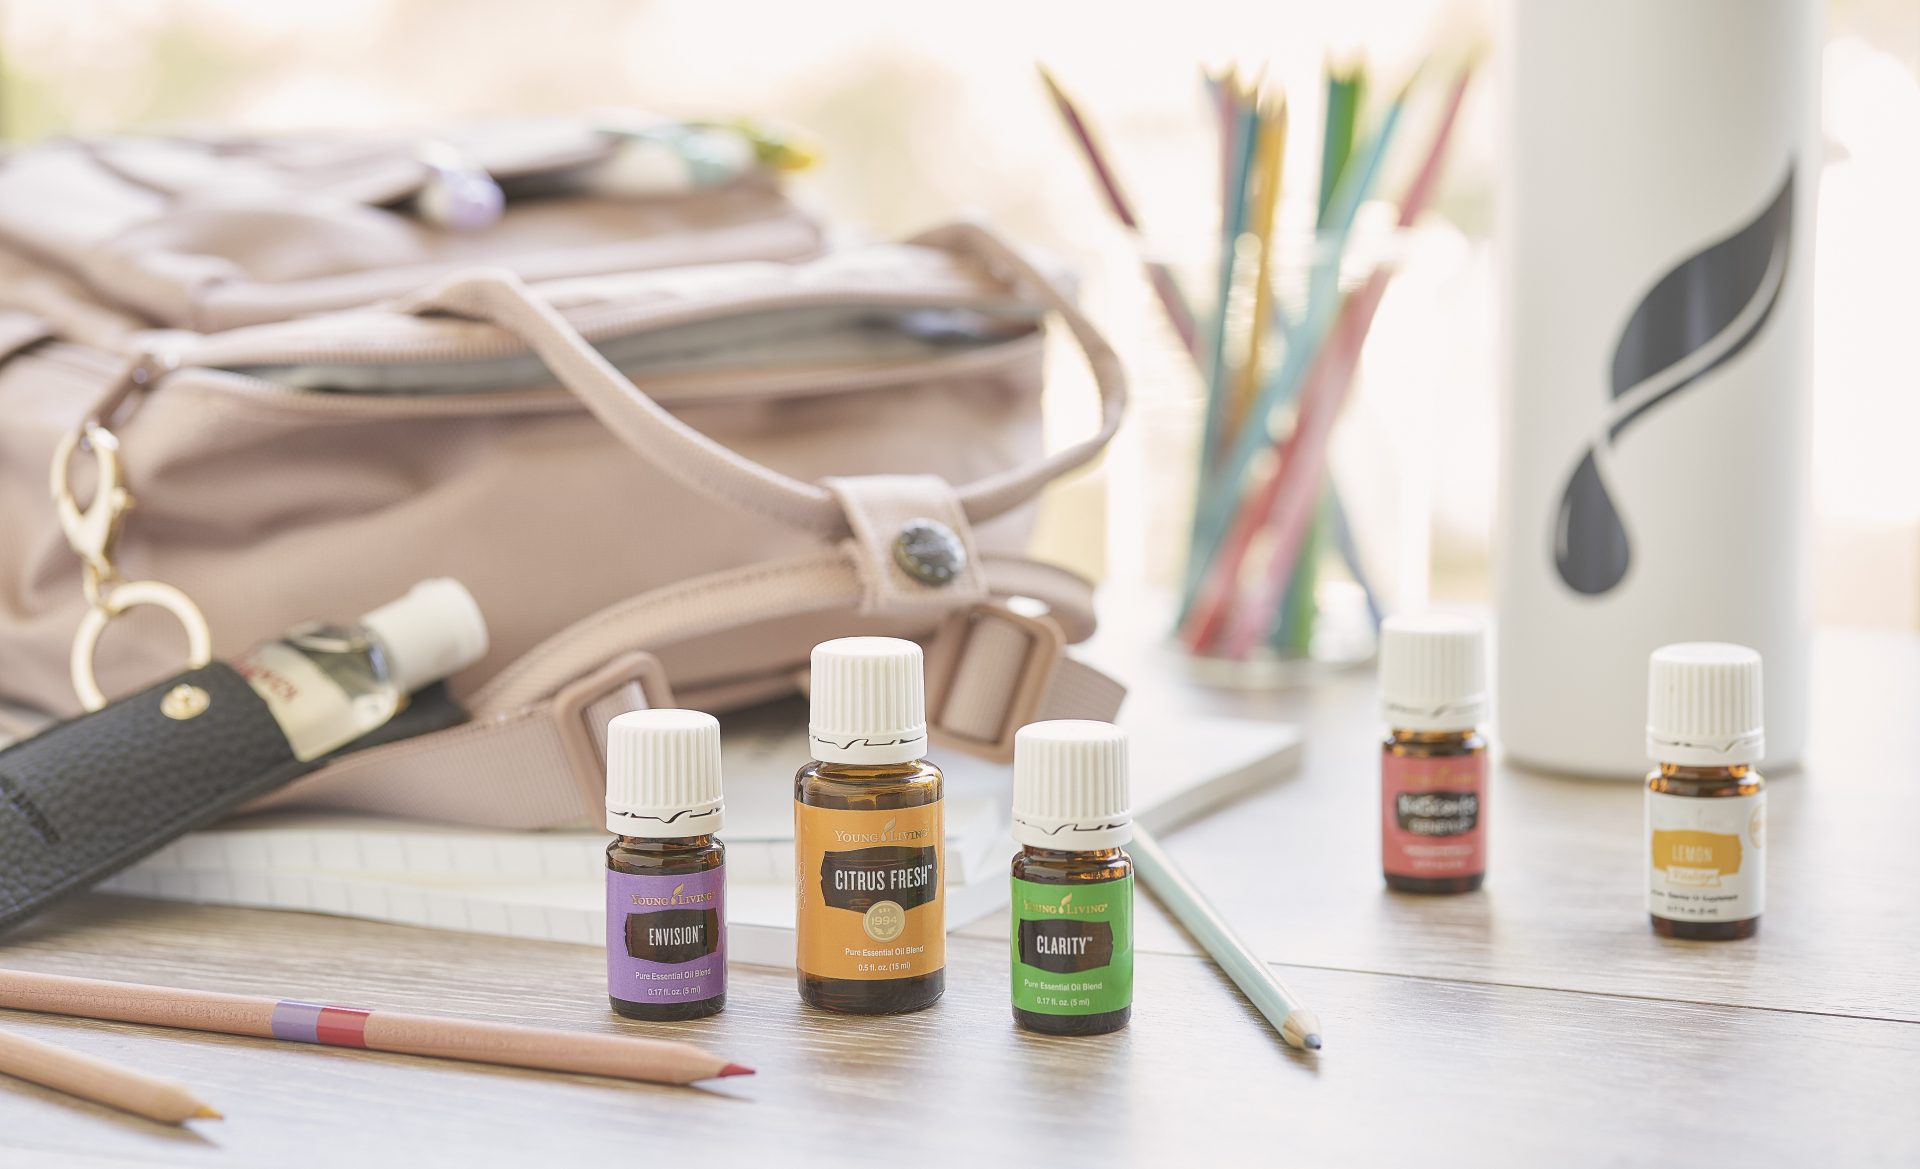 Envision, Citrus Fresh, Clarity, KidScents GeneYus, and Lemon Vitality essential oils surrounded by a backpack, YL Gear Drop bottle, Madison hand sanitizer holder, and other school supplies - Young Living Lavender Life Blog 